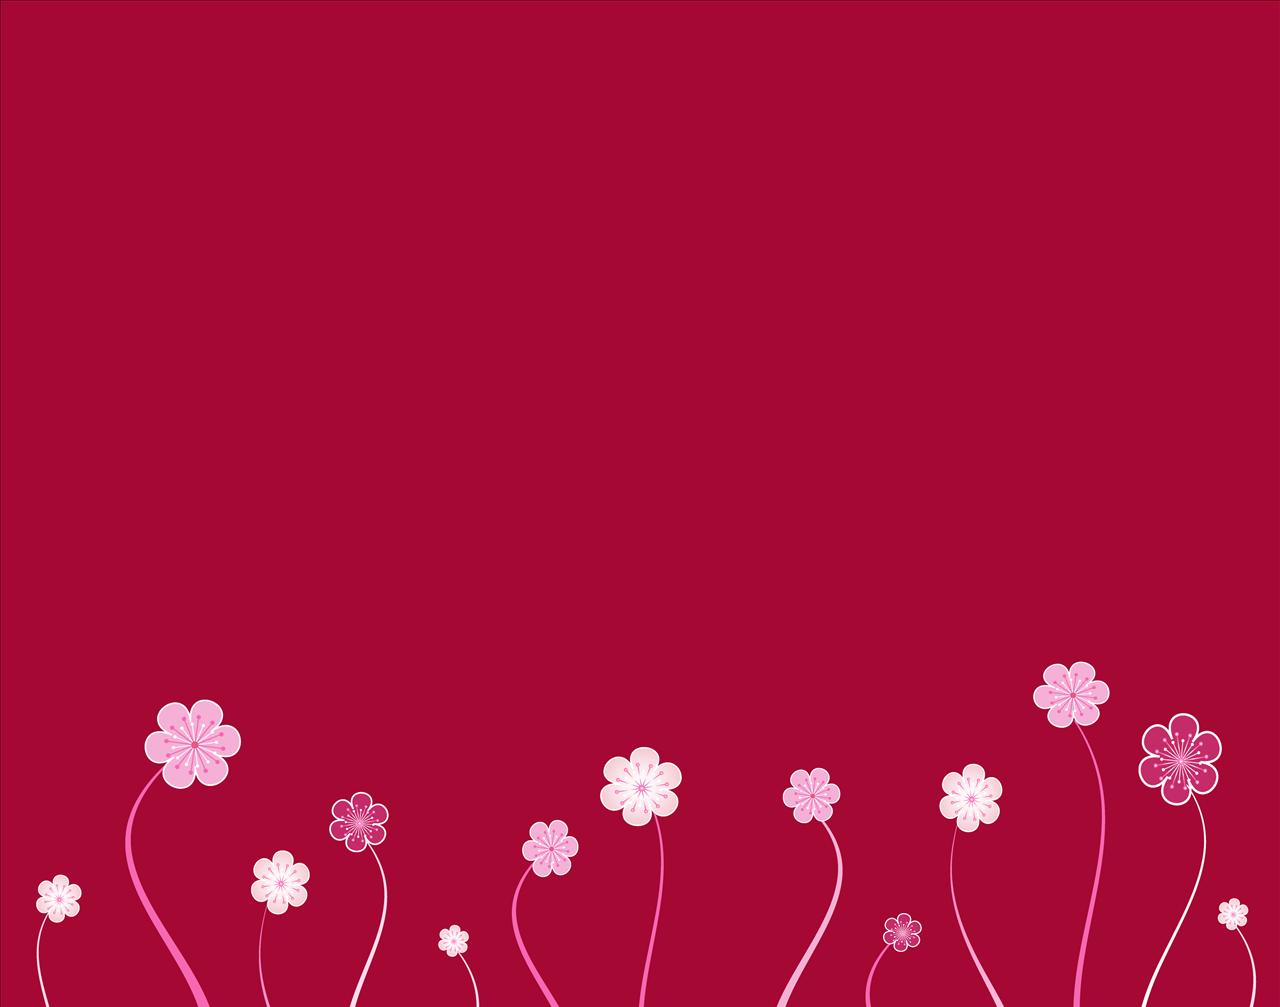 Spring Blossoms PPT Backgrounds